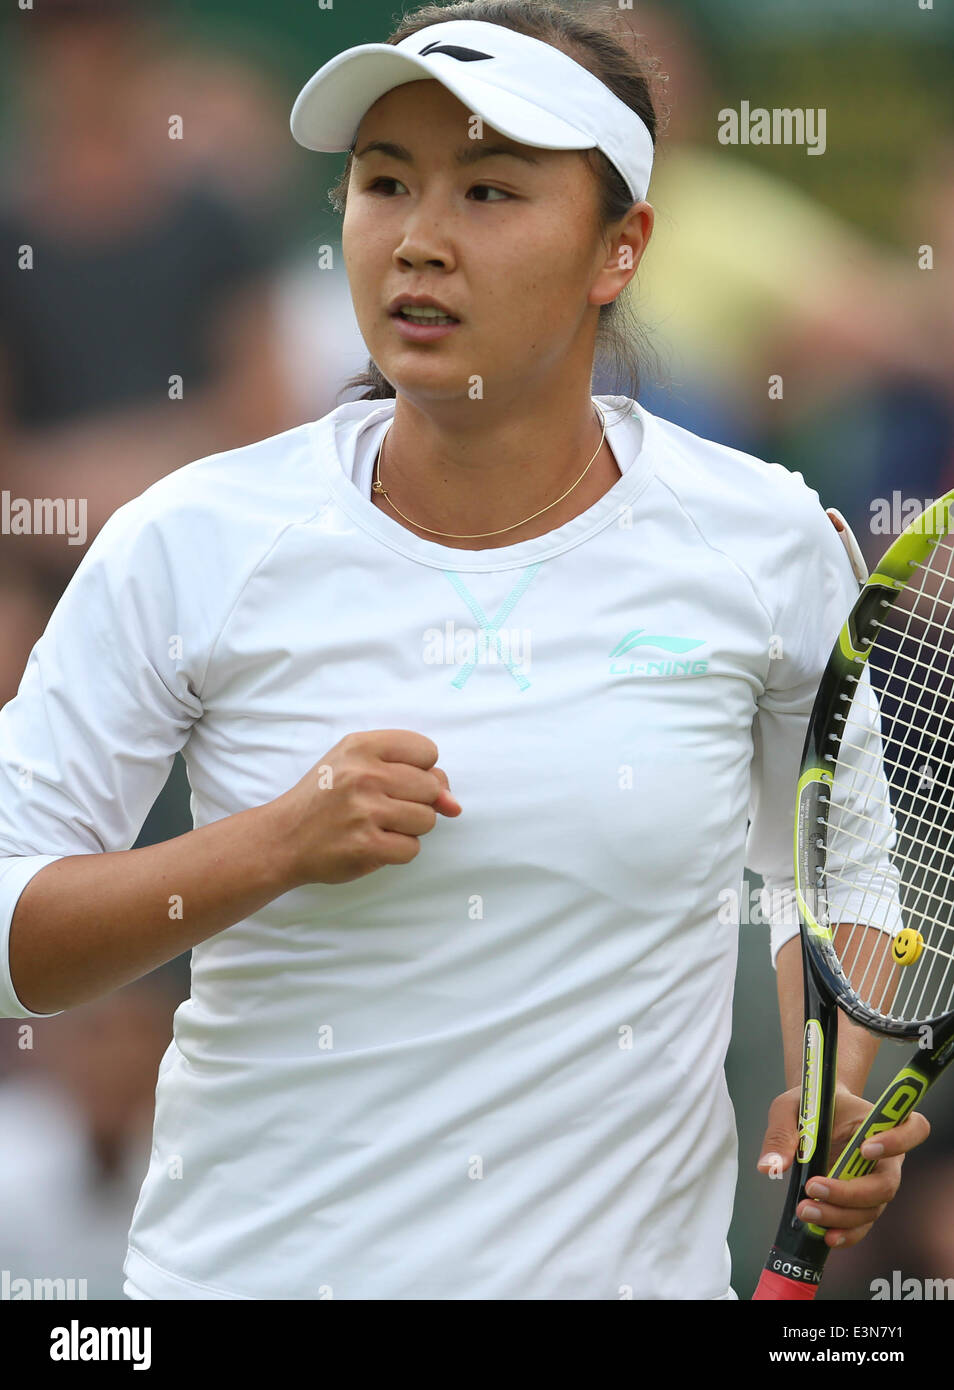 London, Britain. 25th June, 2014. Peng Shuai of China celebrates during the women's singles second round match against Maria Kirilenko of Russia at the 2014 Wimbledon Championships in Wimbledon, southwest London, Britain, on June 25, 2014. Peng Shuai won 2-0. Credit:  Meng Yongmin/Xinhua/Alamy Live News Stock Photo